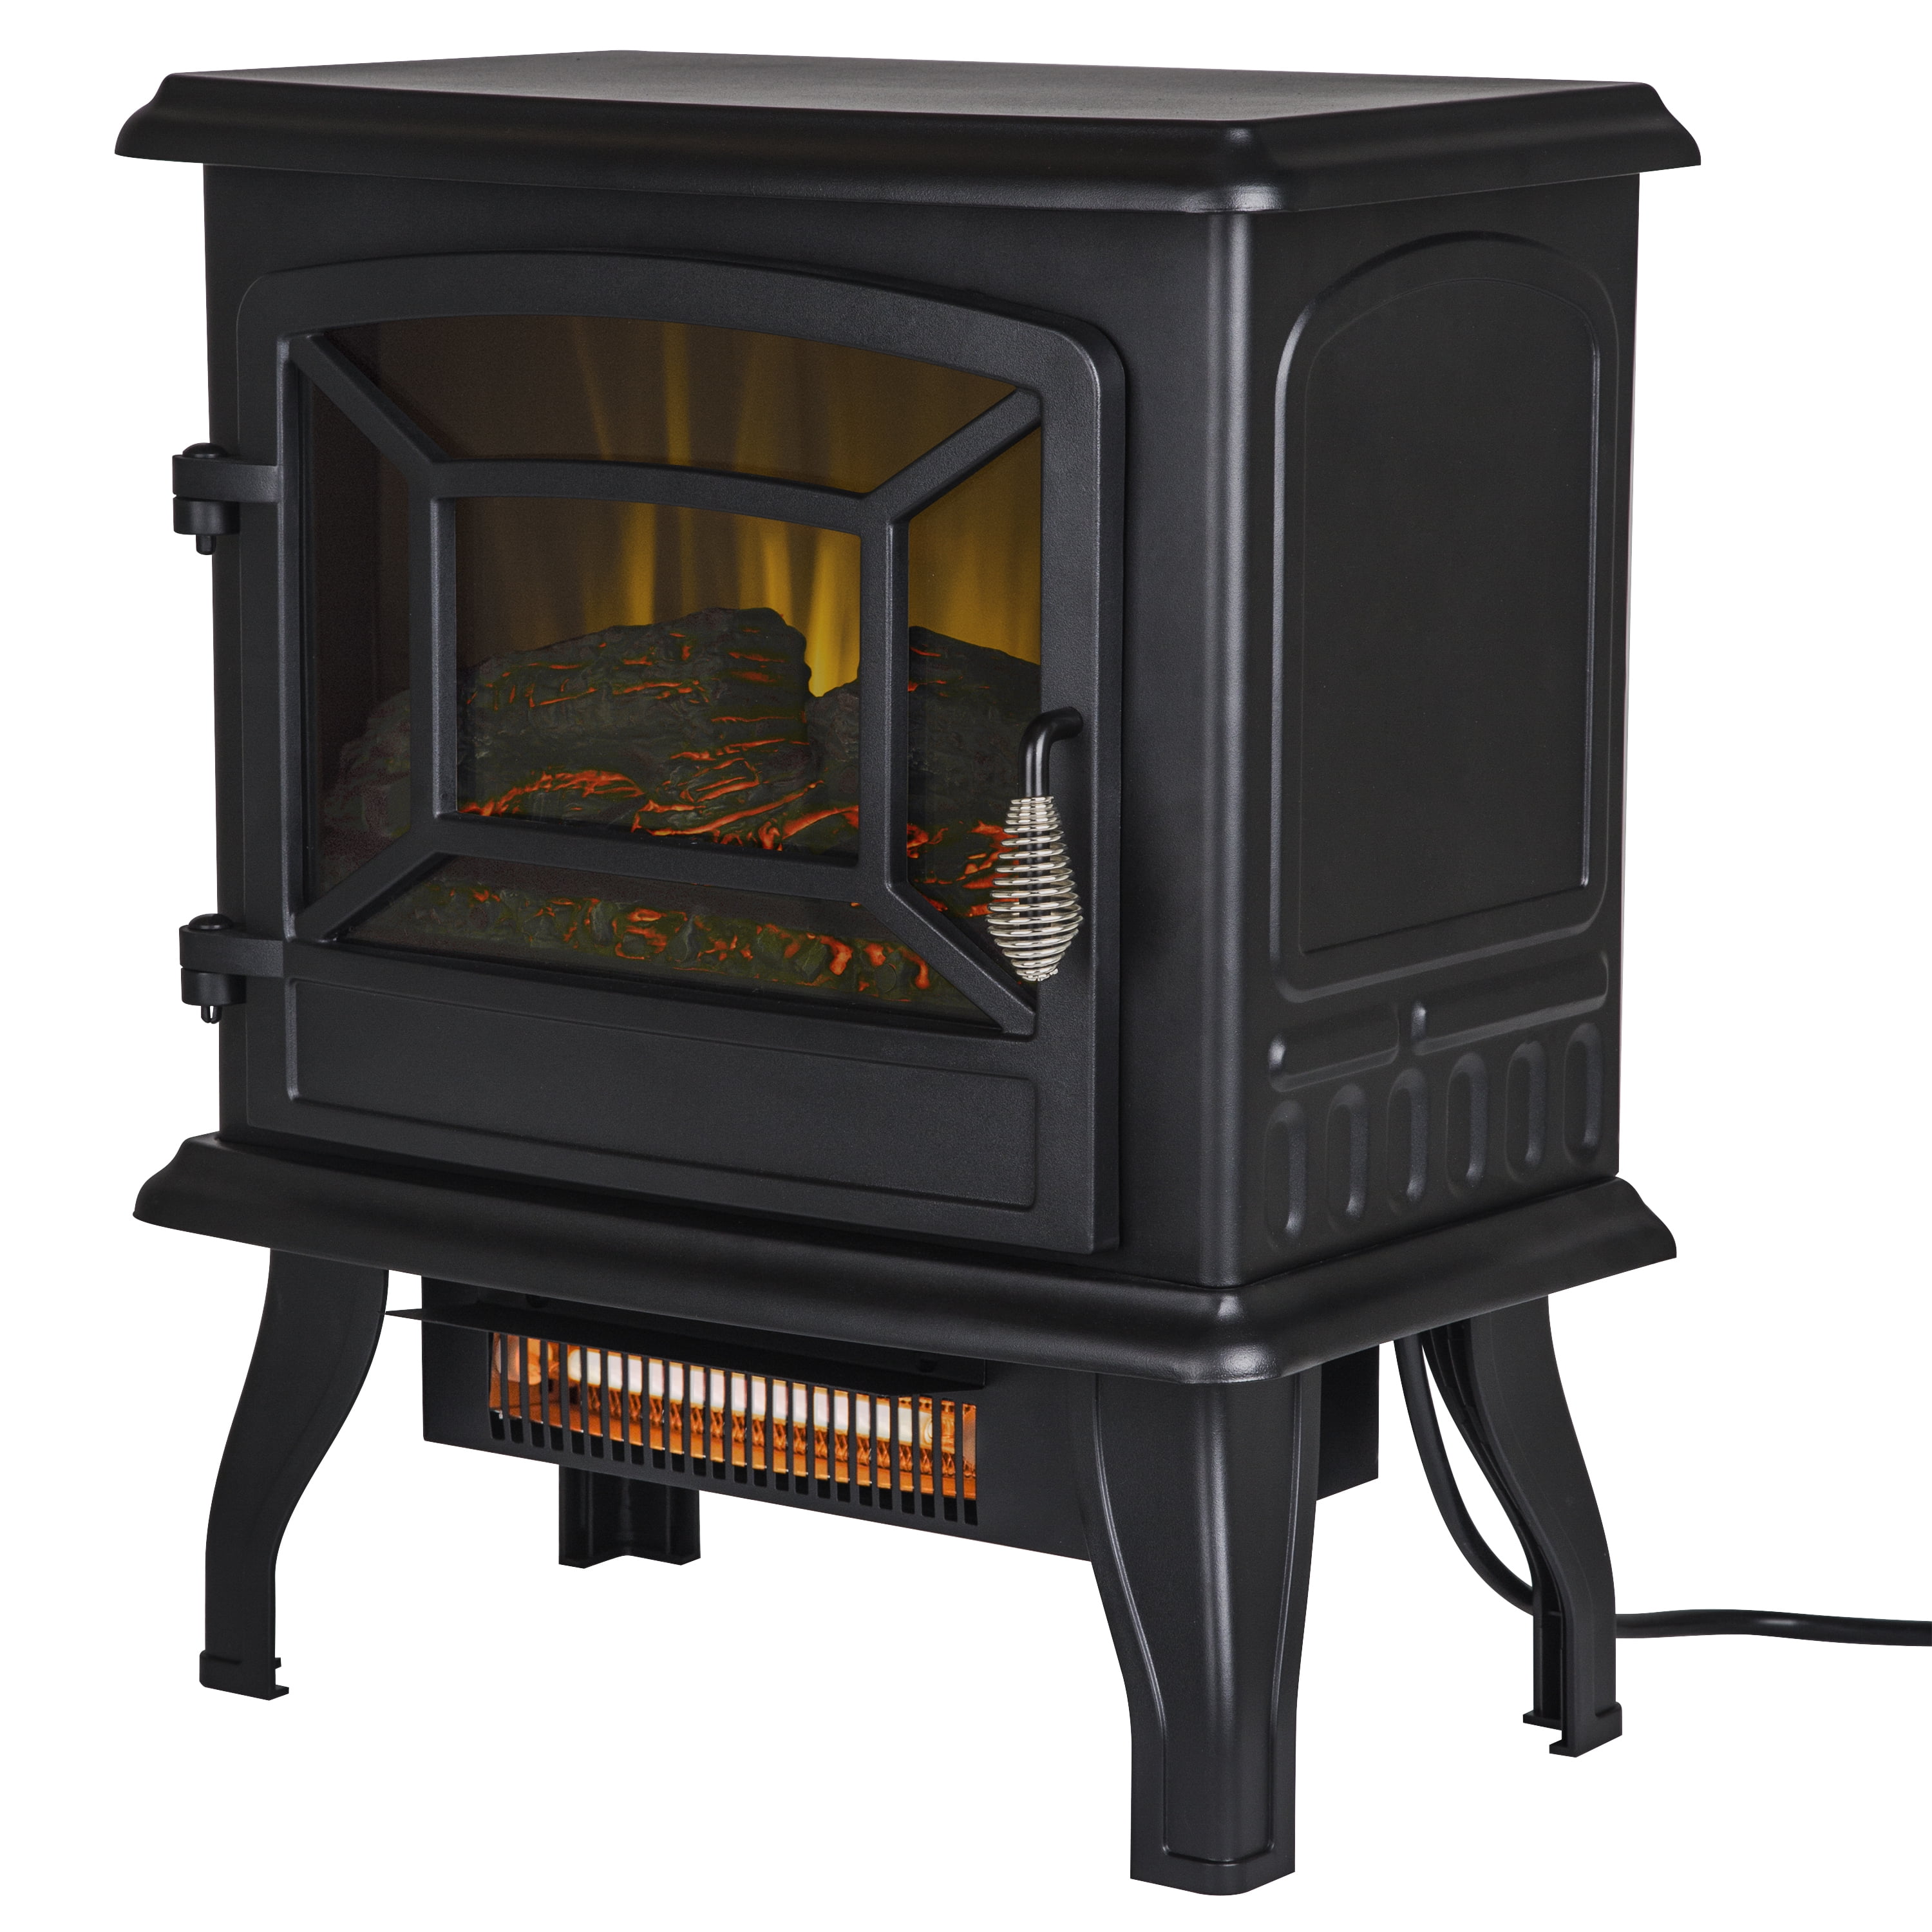 buy-pleasant-hearth-17-in-infrared-electric-stove-with-2-stage-heater